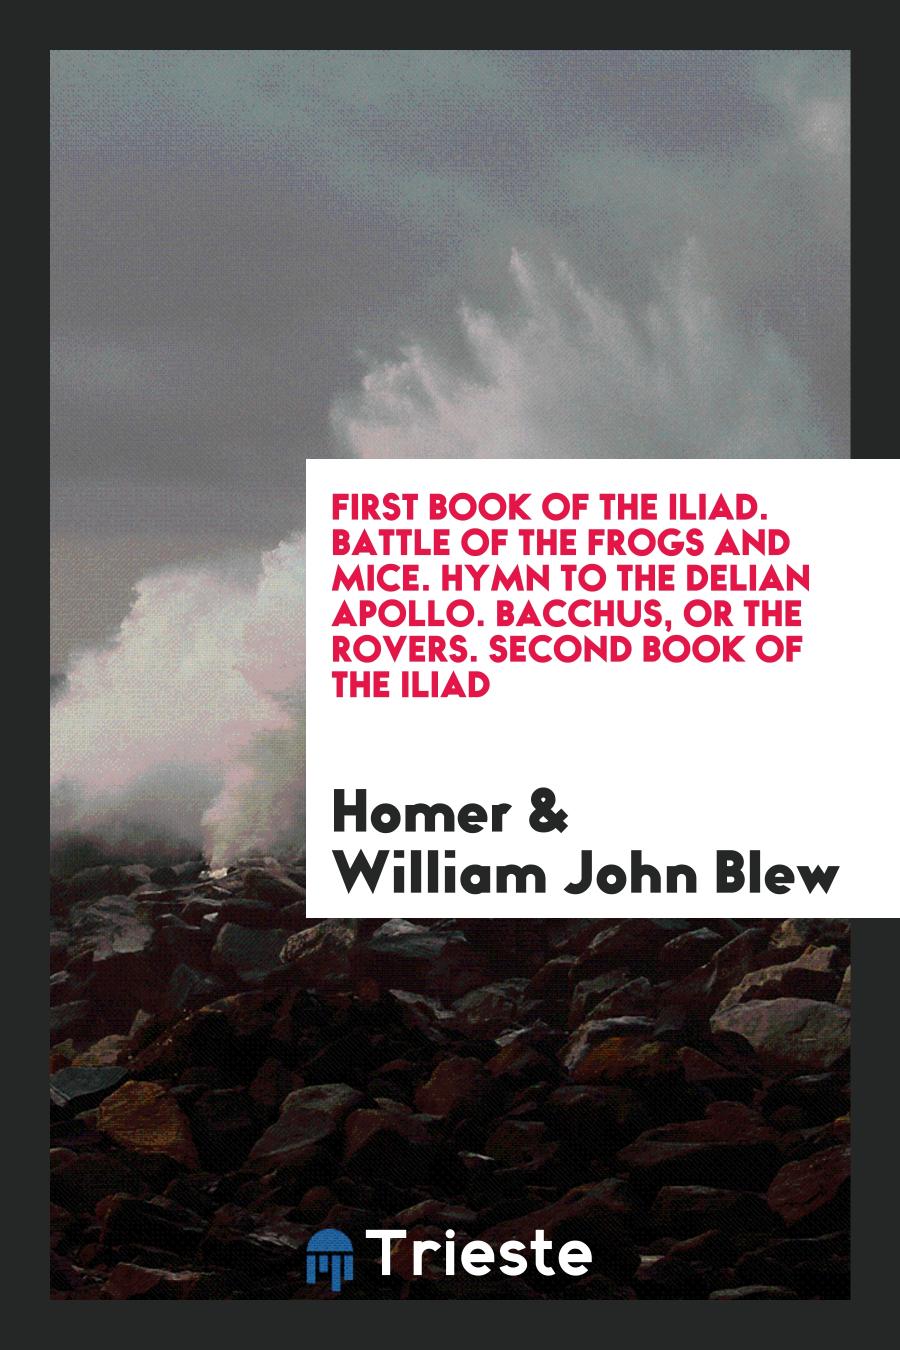 First Book of the Iliad. Battle of the Frogs and Mice. Hymn to the Delian Apollo. Bacchus, or the Rovers. Second Book of the Iliad